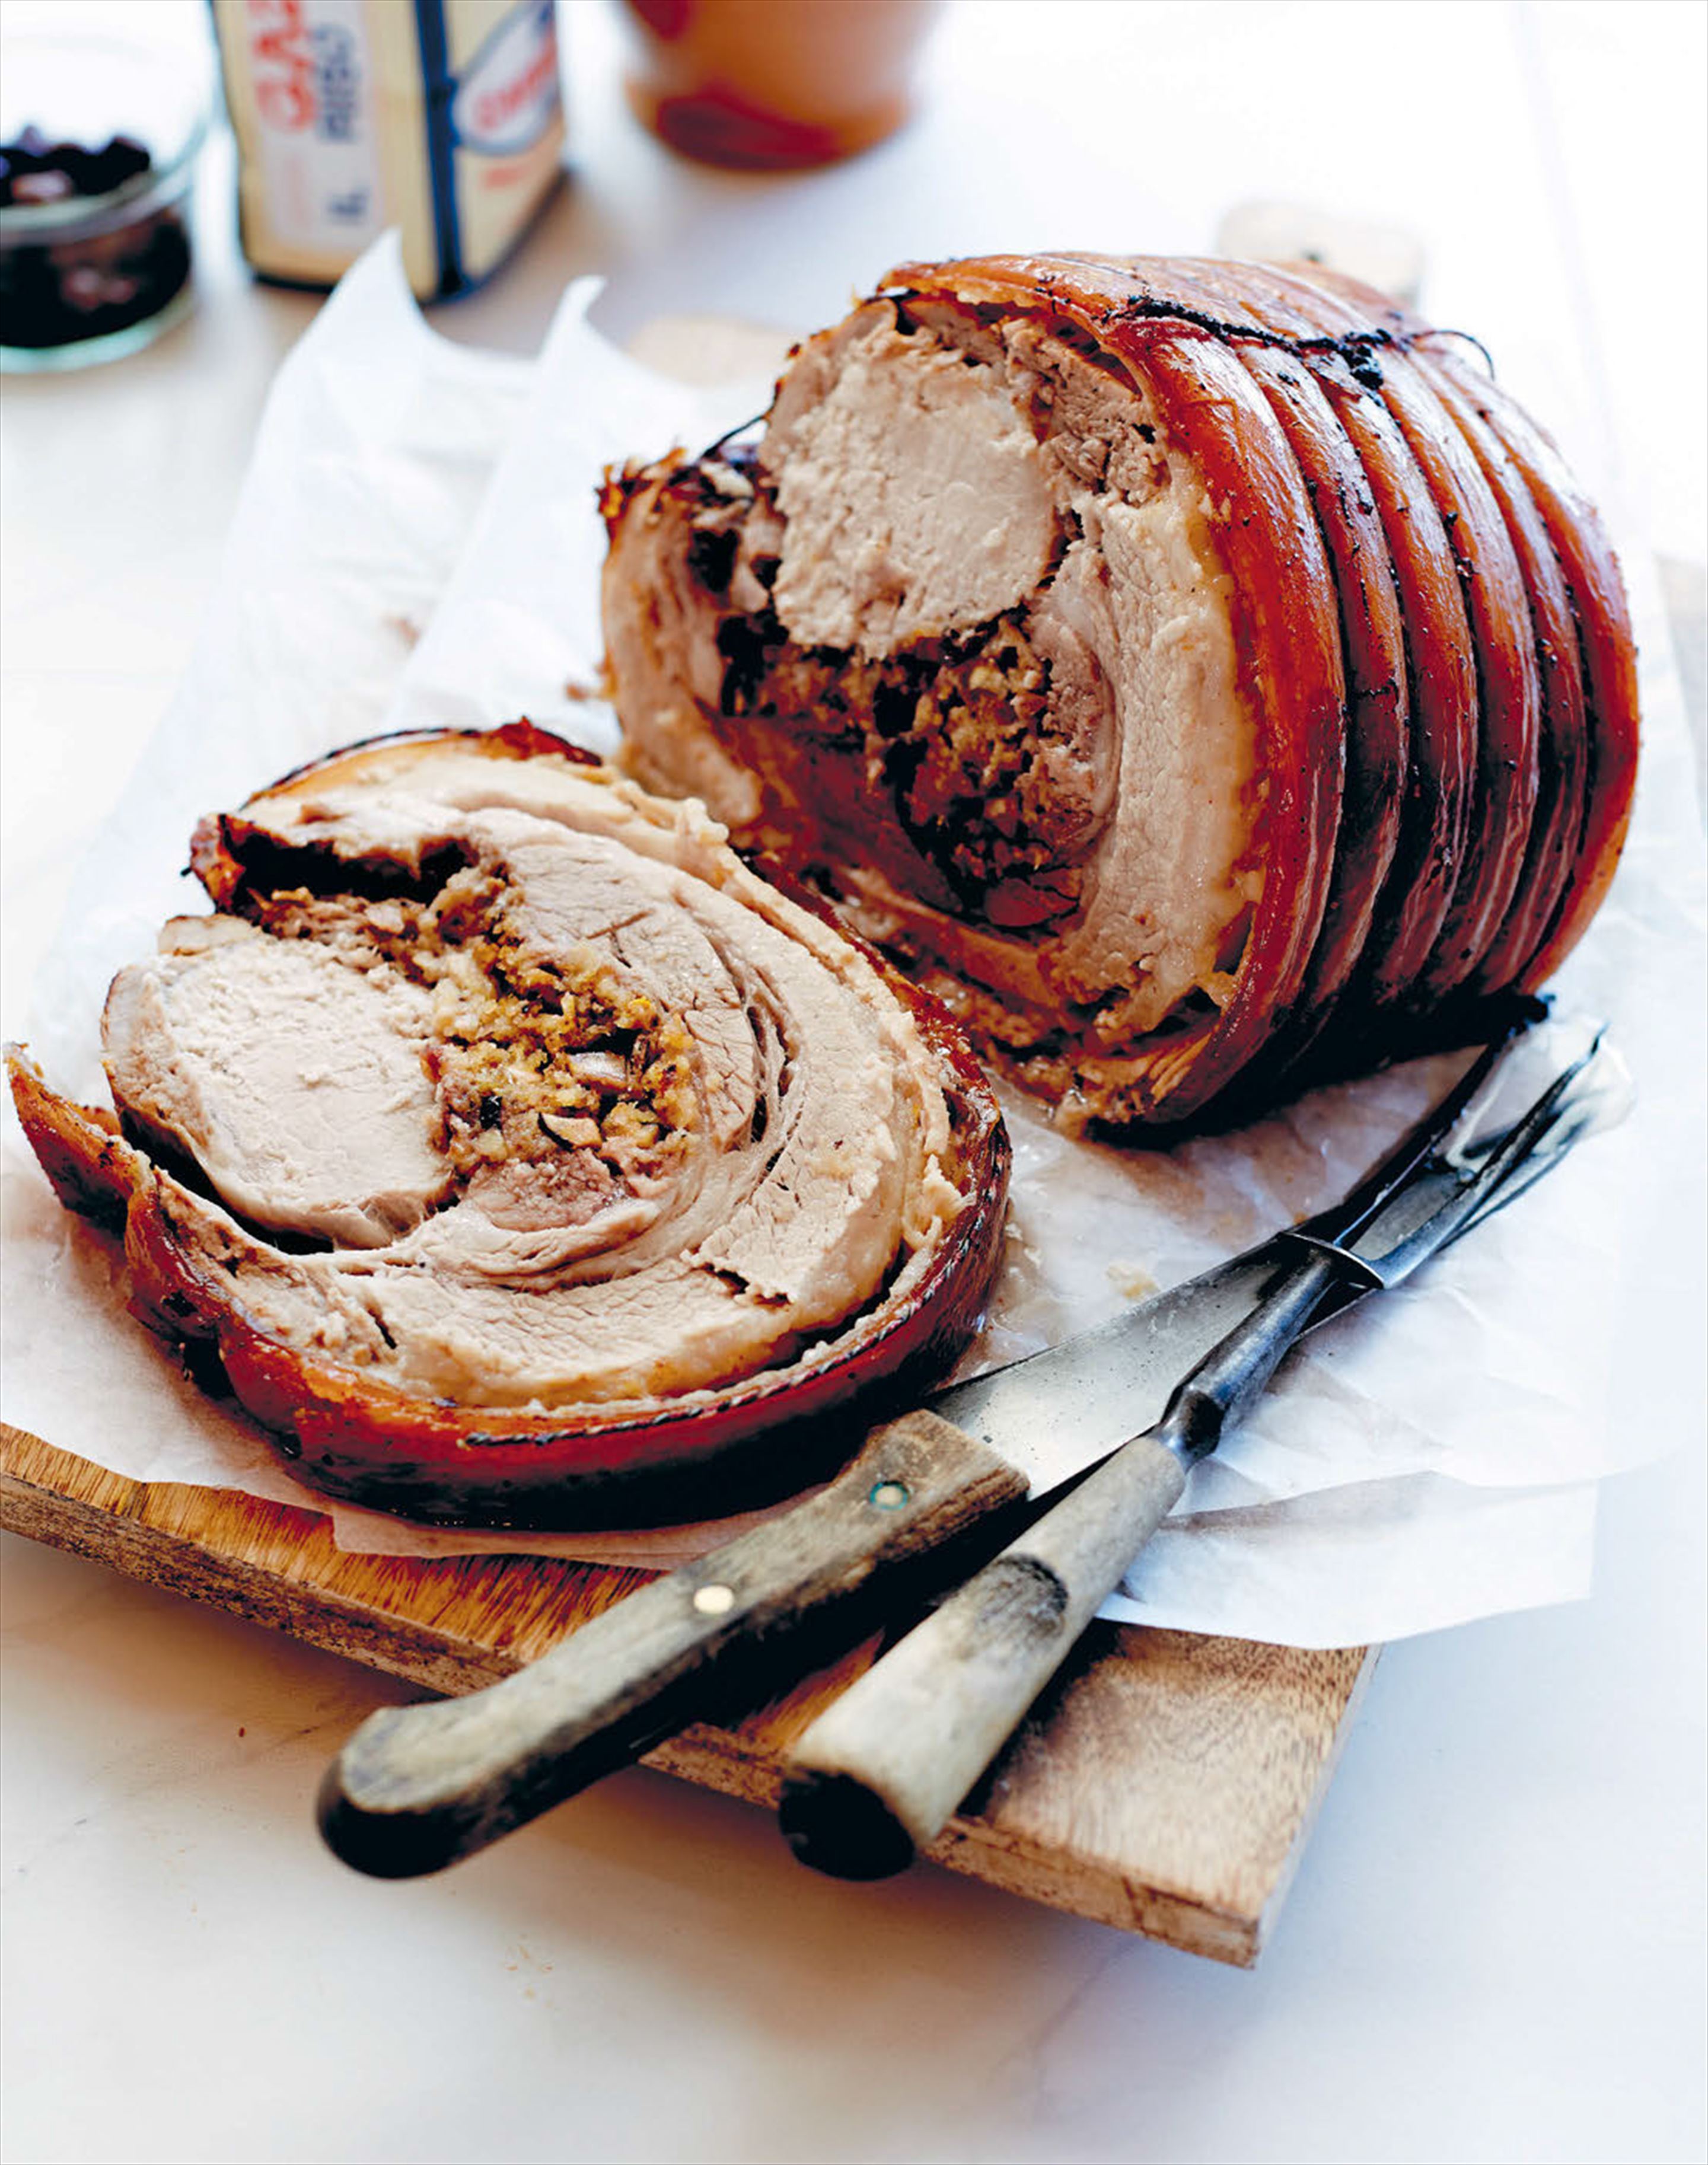 Slow-roasted boneless pork loin stuffed with chestnuts and cranberries